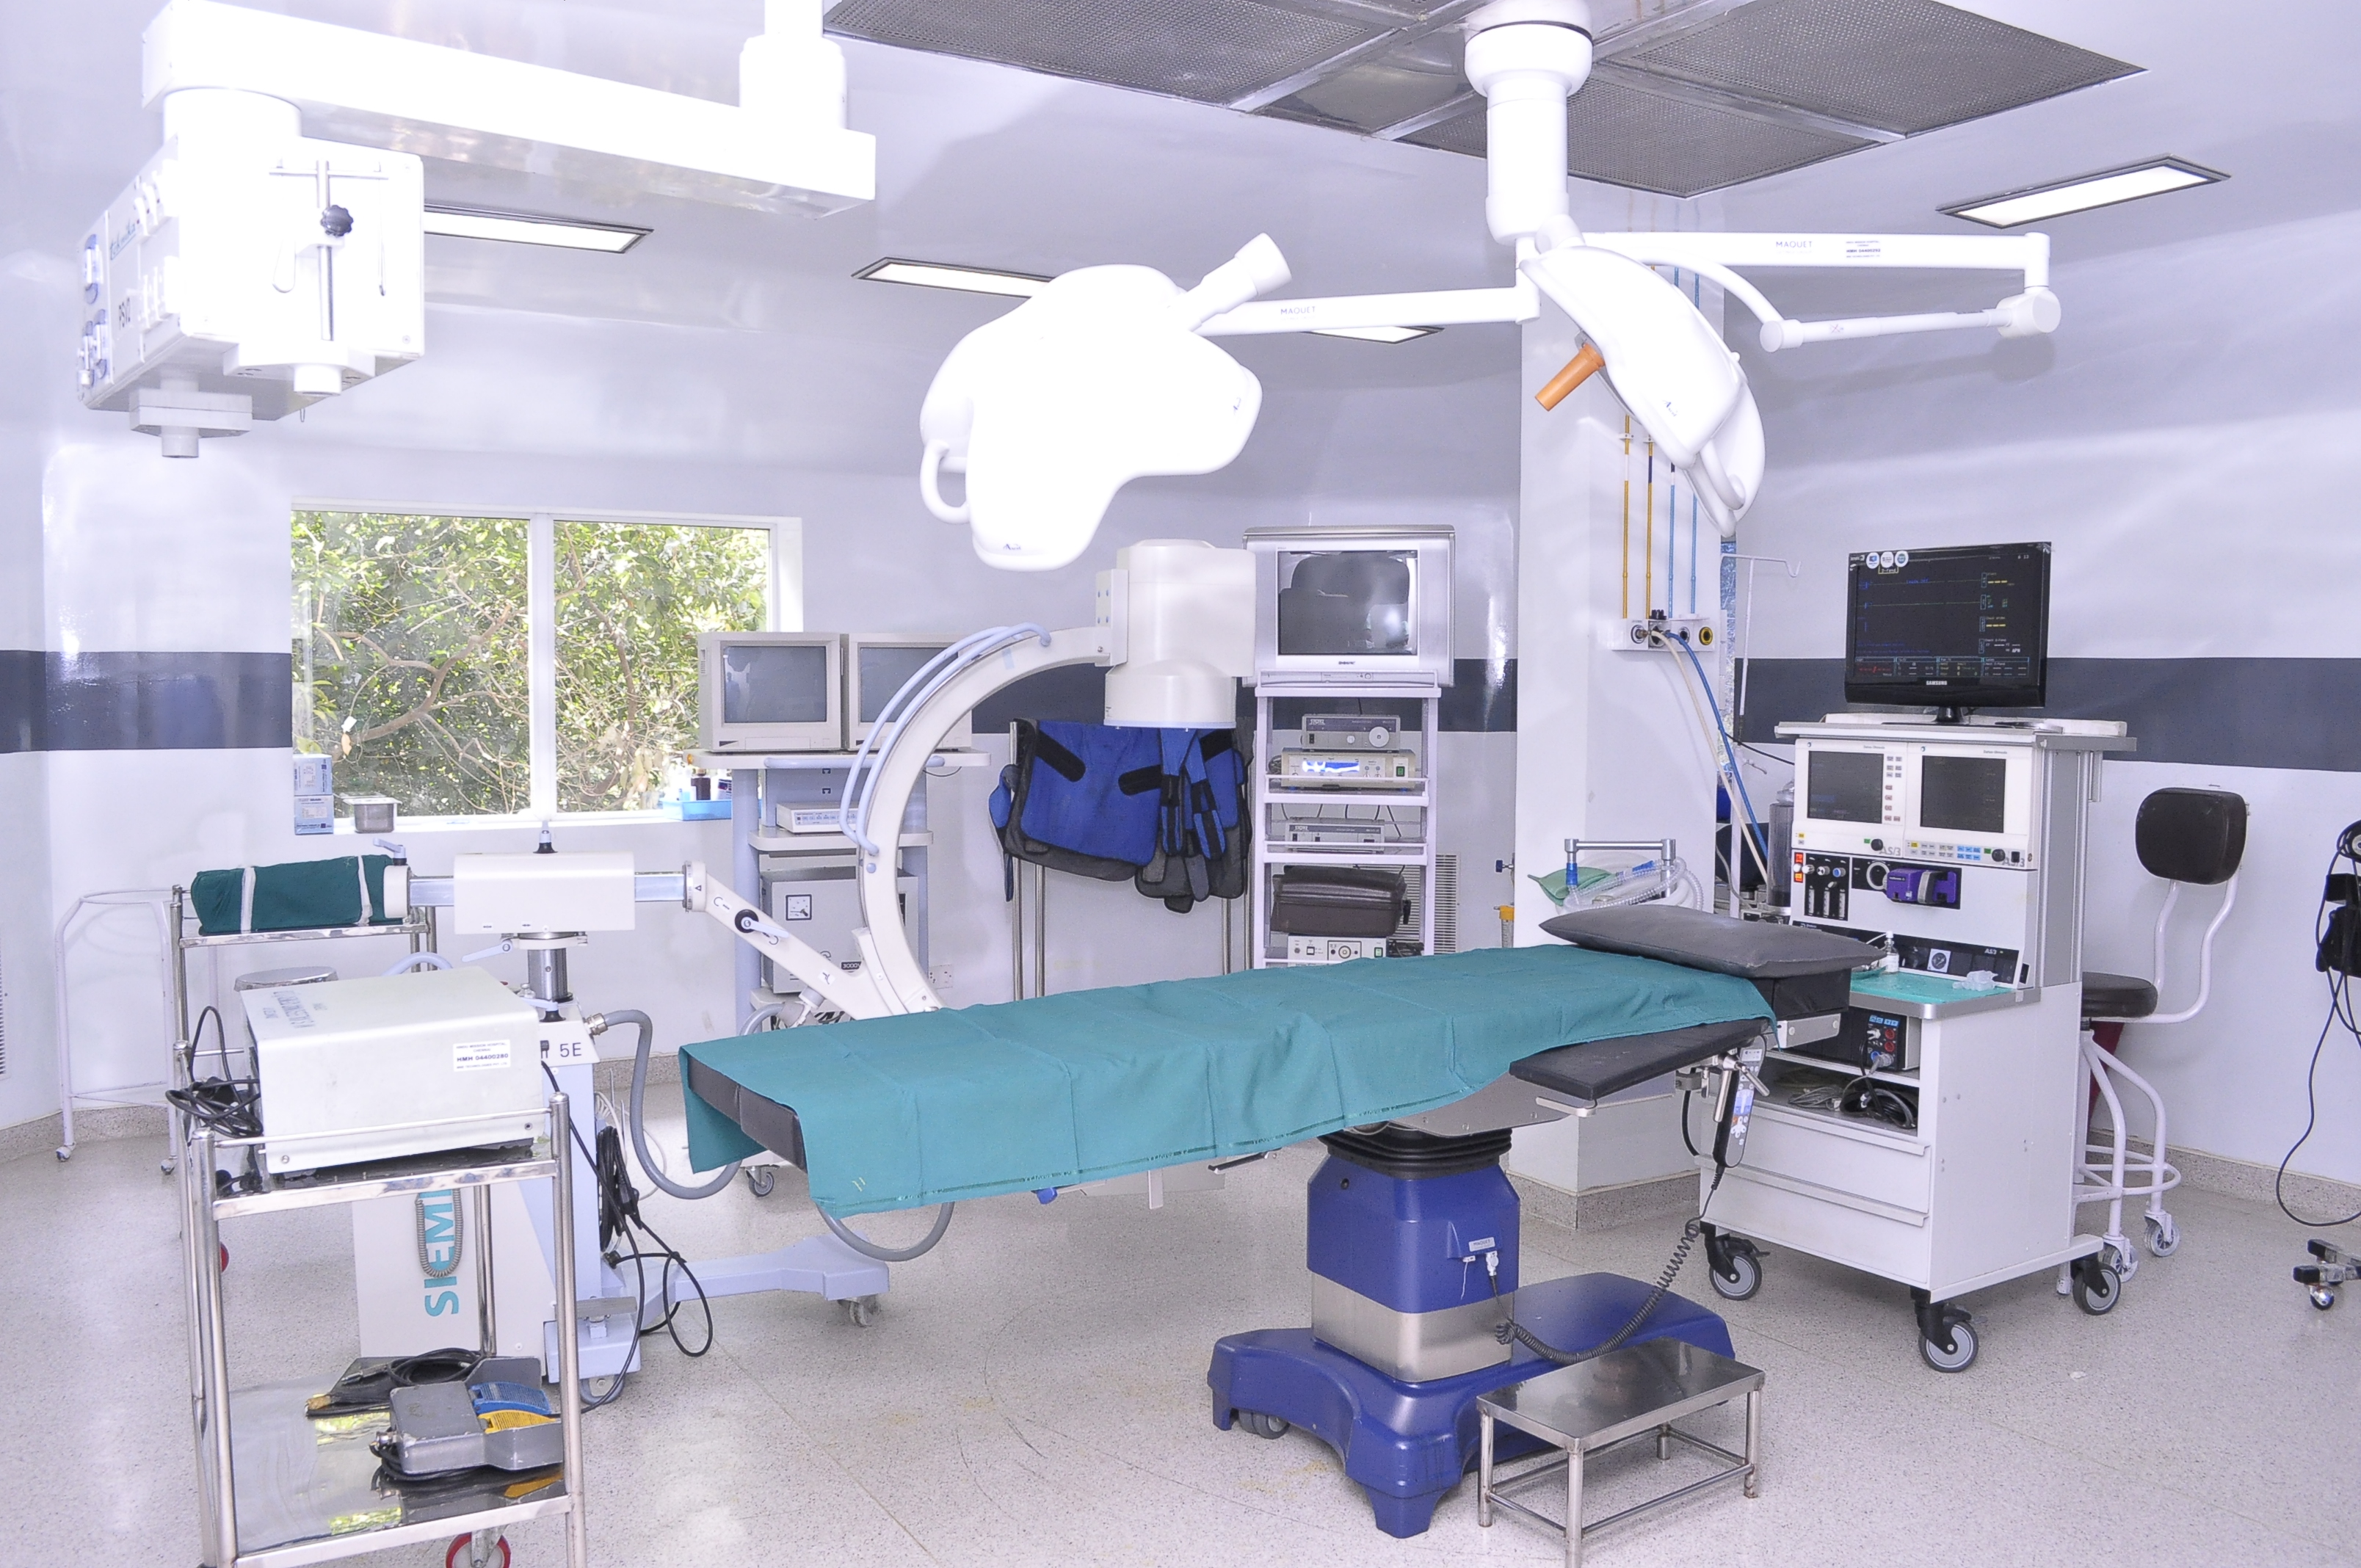 Operating theatres. Операцион синструмети. Operating Theatre. Operation Room. Hospital Surgical Special Lights.